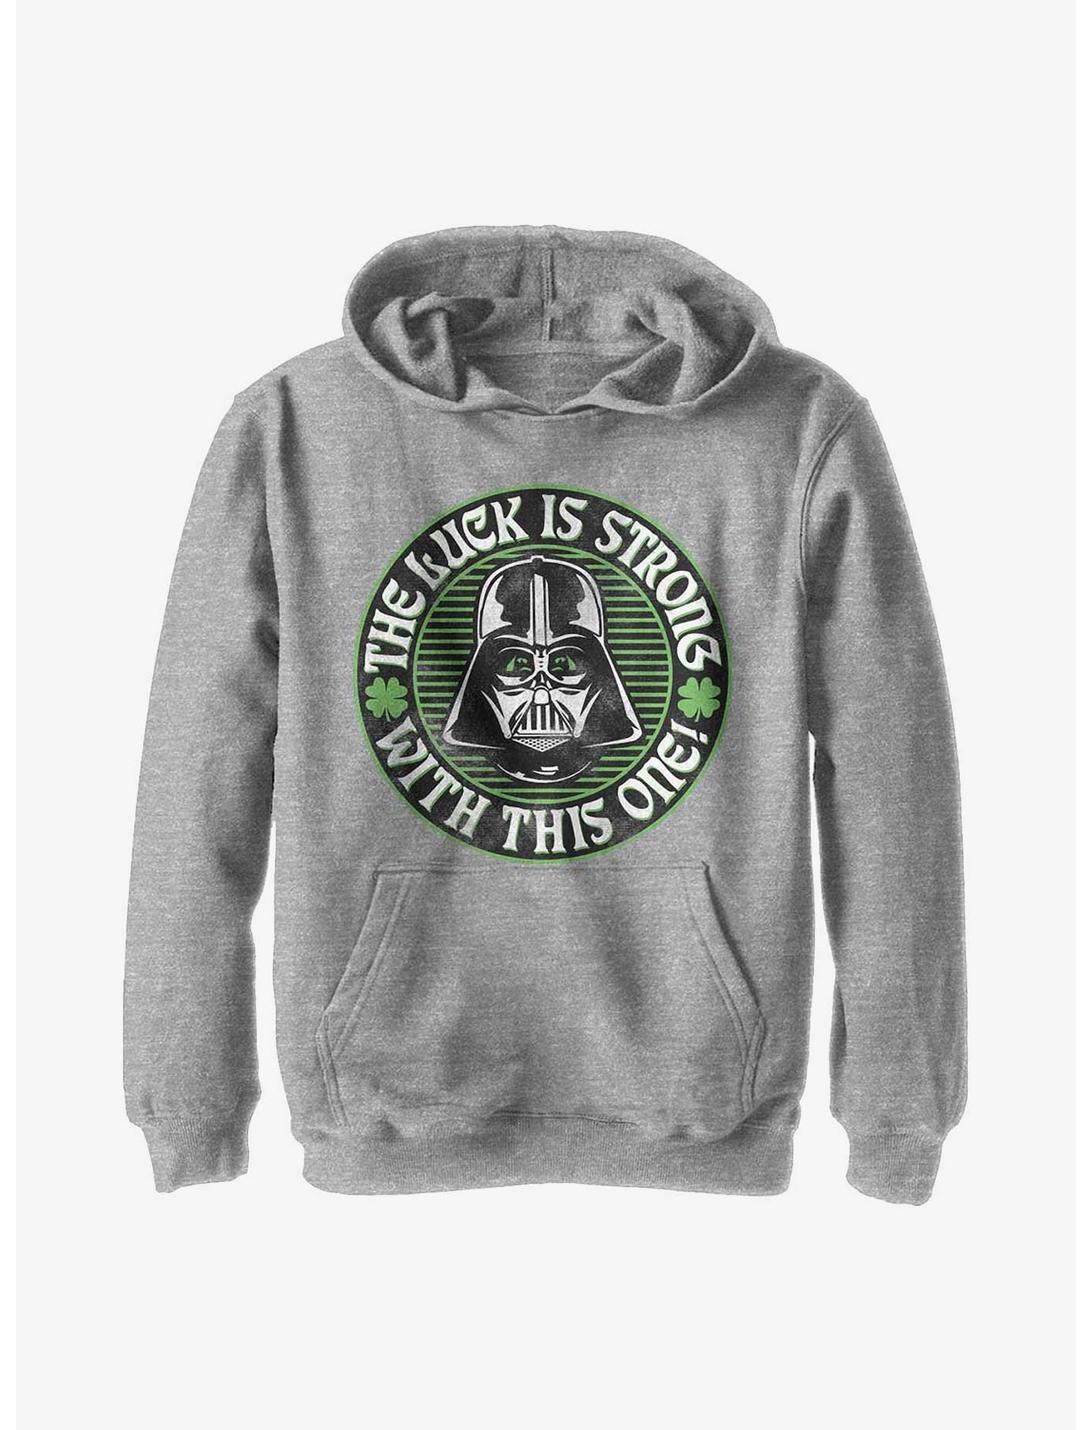 Star Wars Luck Is Strong Youth Hoodie, ATH HTR, hi-res